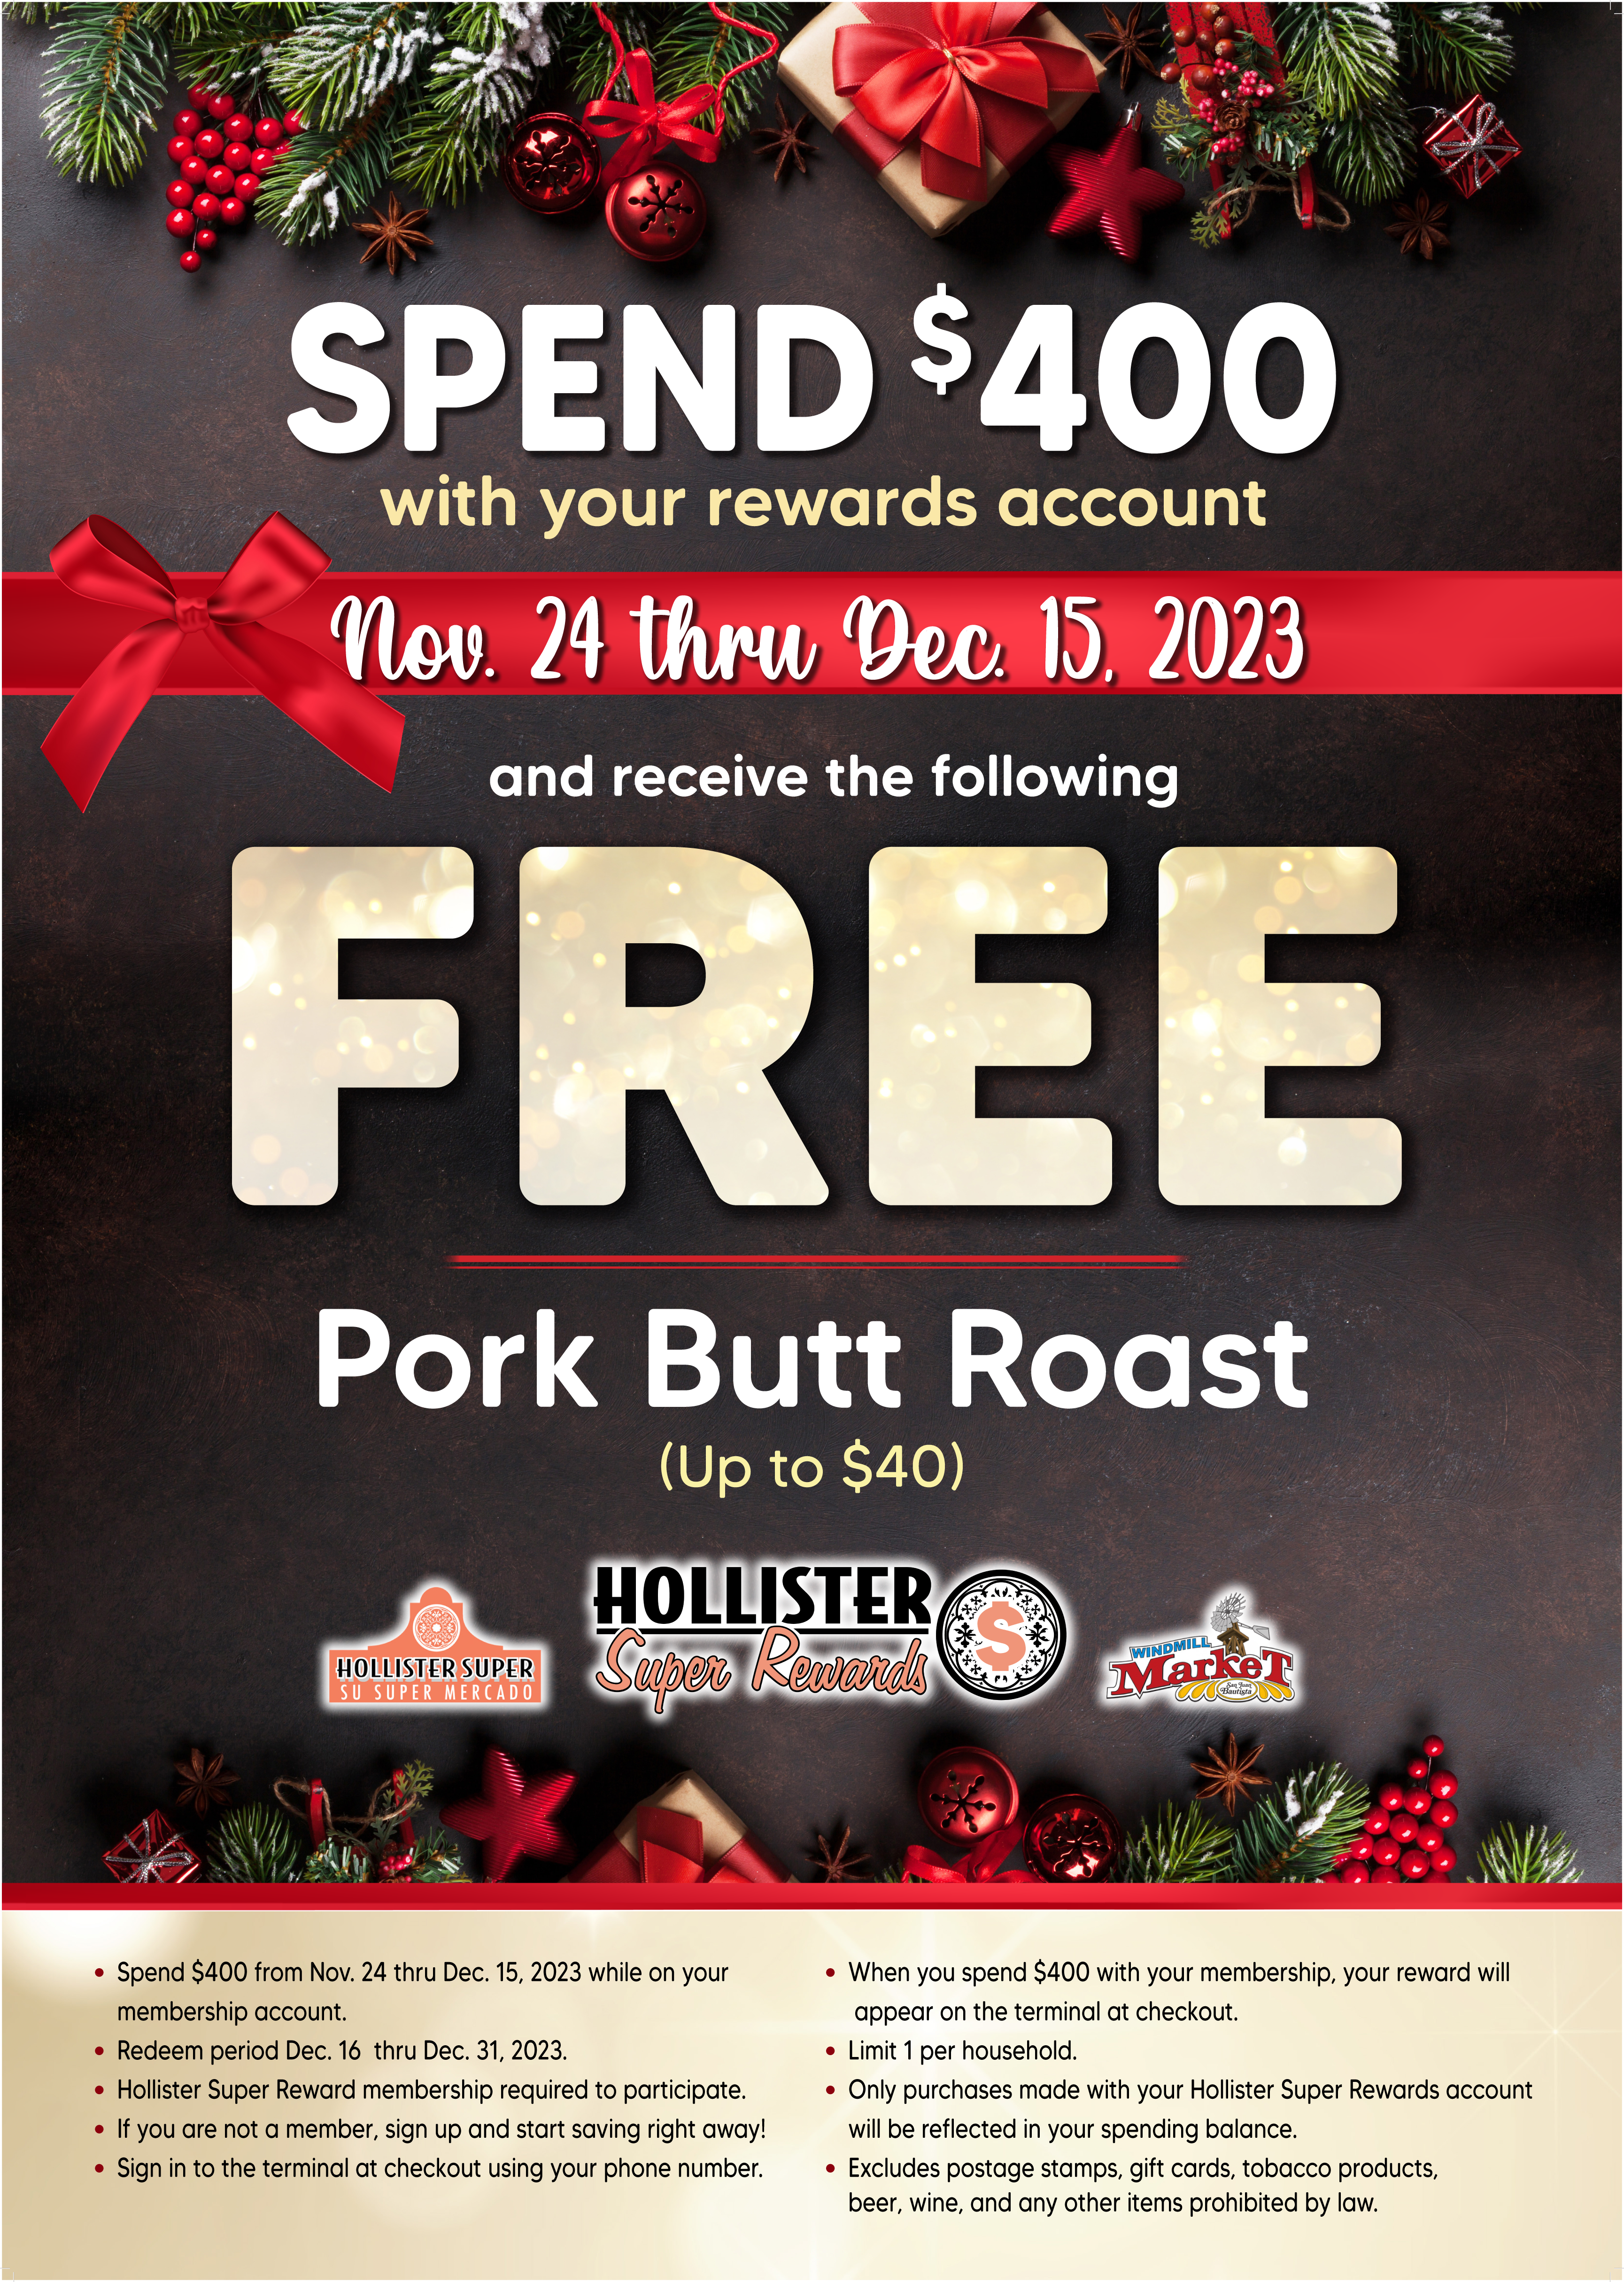 Christmas Promo Spend $400 with your rewards account nov 24 - dec 15th and receive a free pork butt roast up to $40 